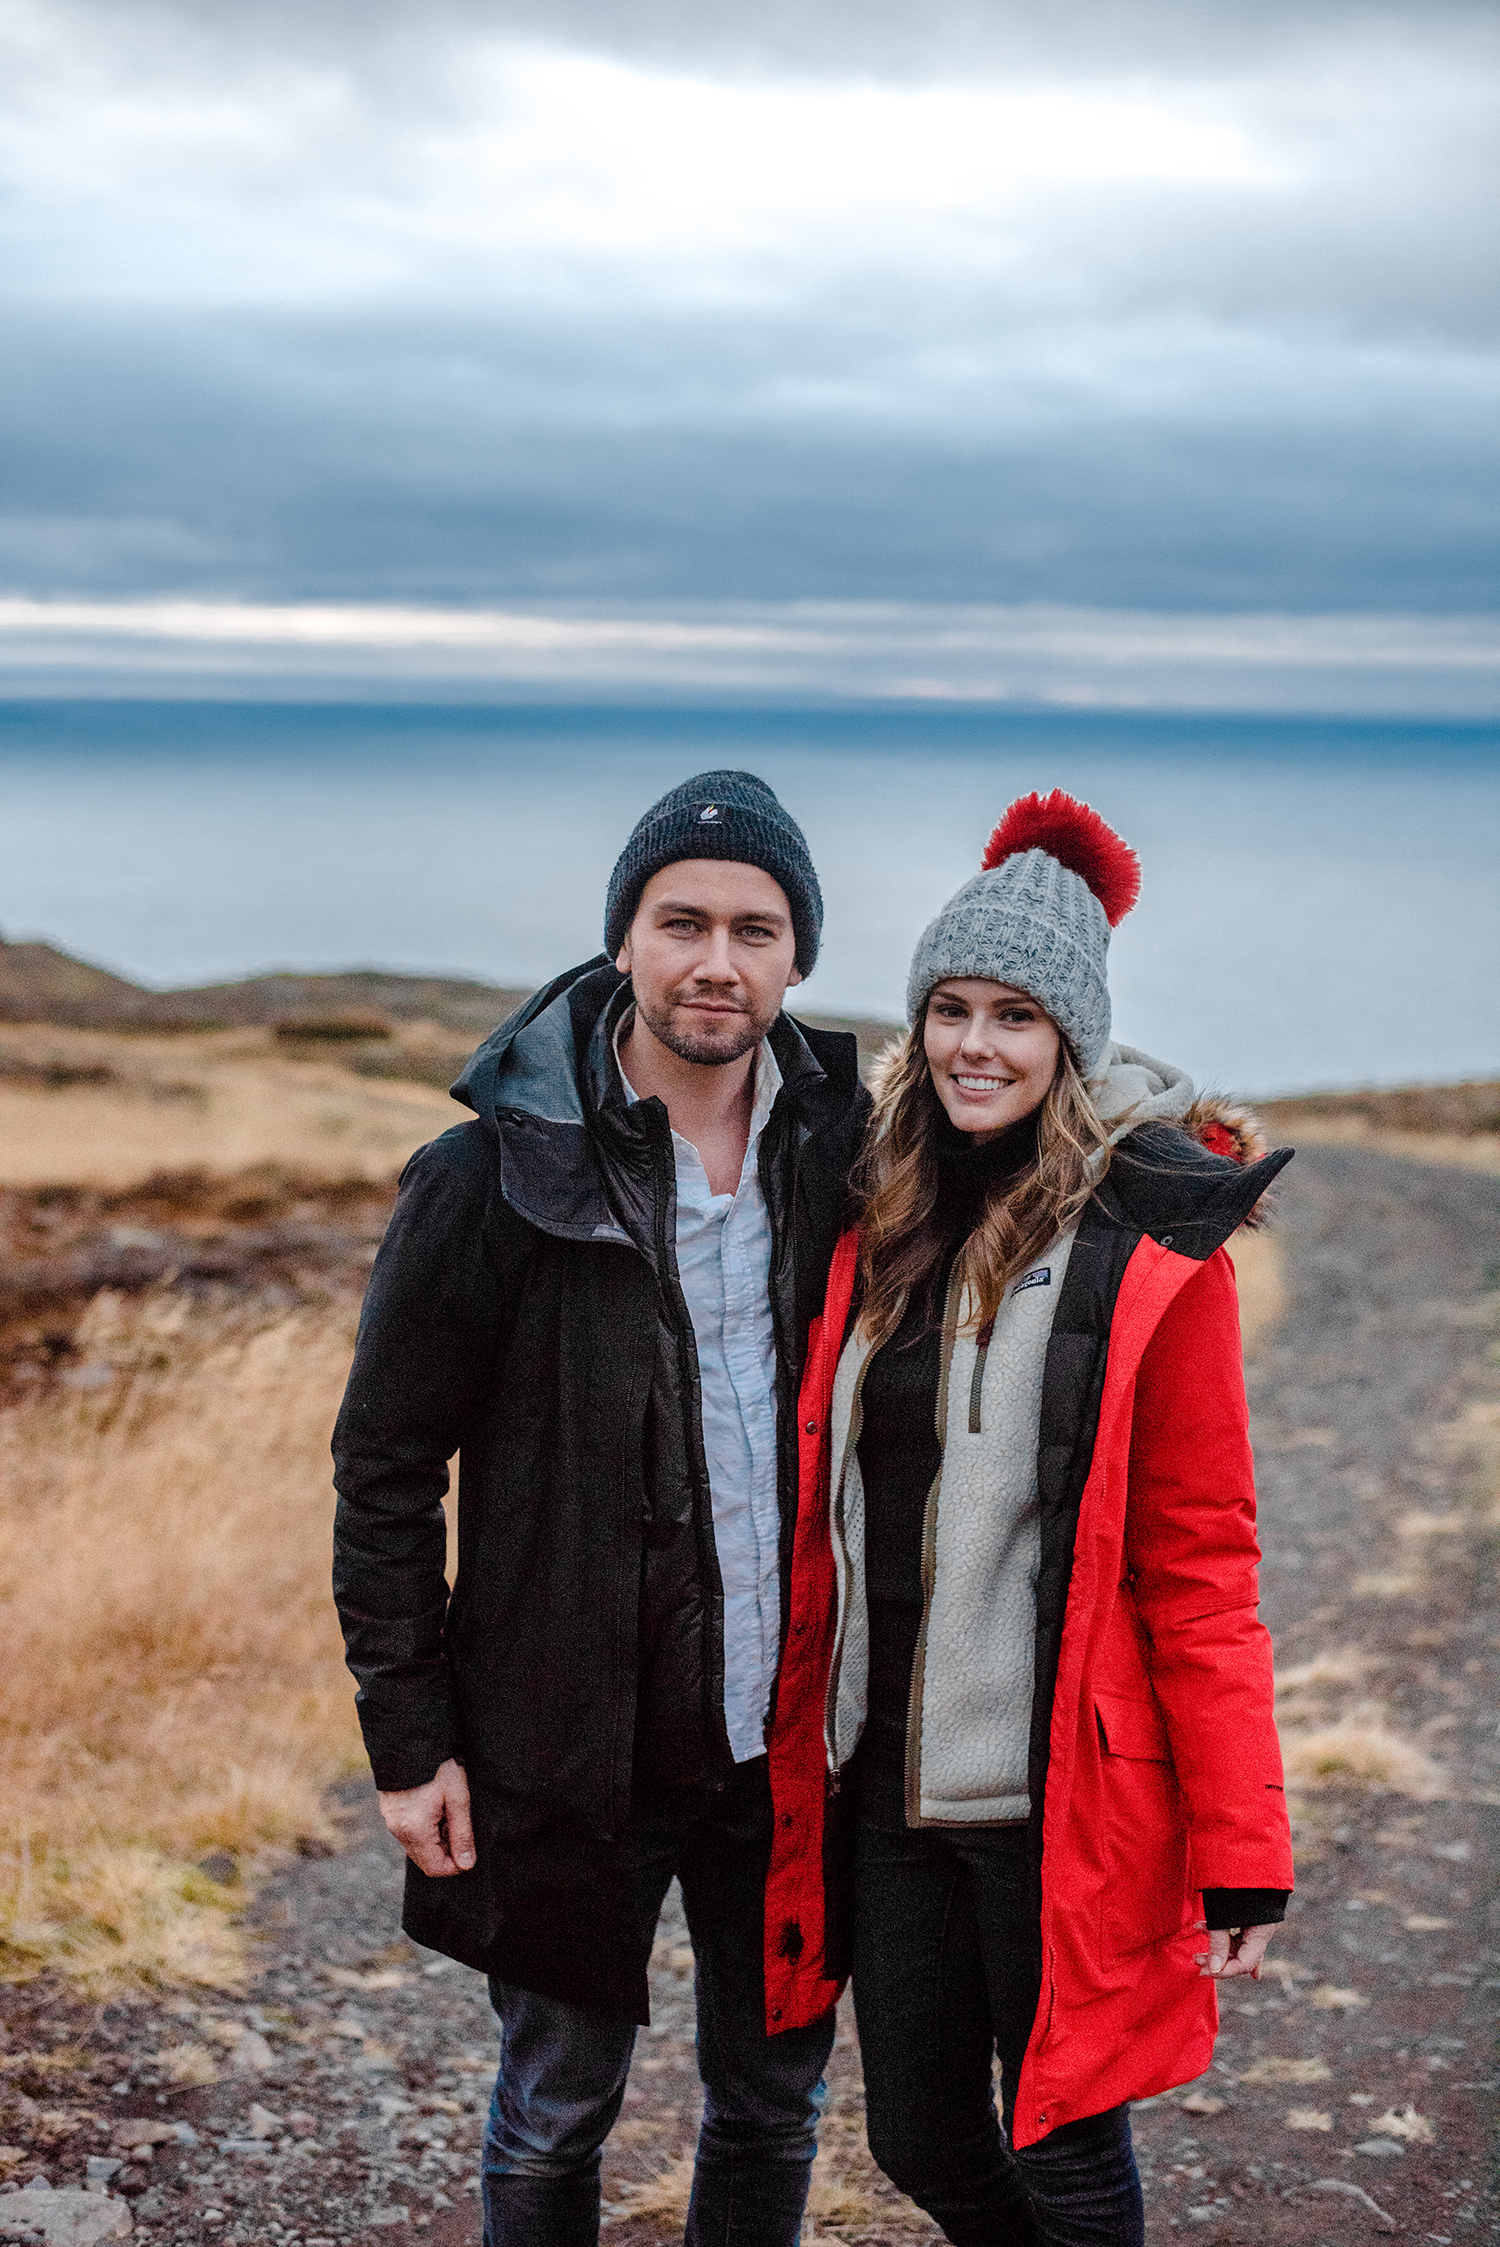 Alyssa Campanella of The A List shares her favorite travels from 2017 in Iceland